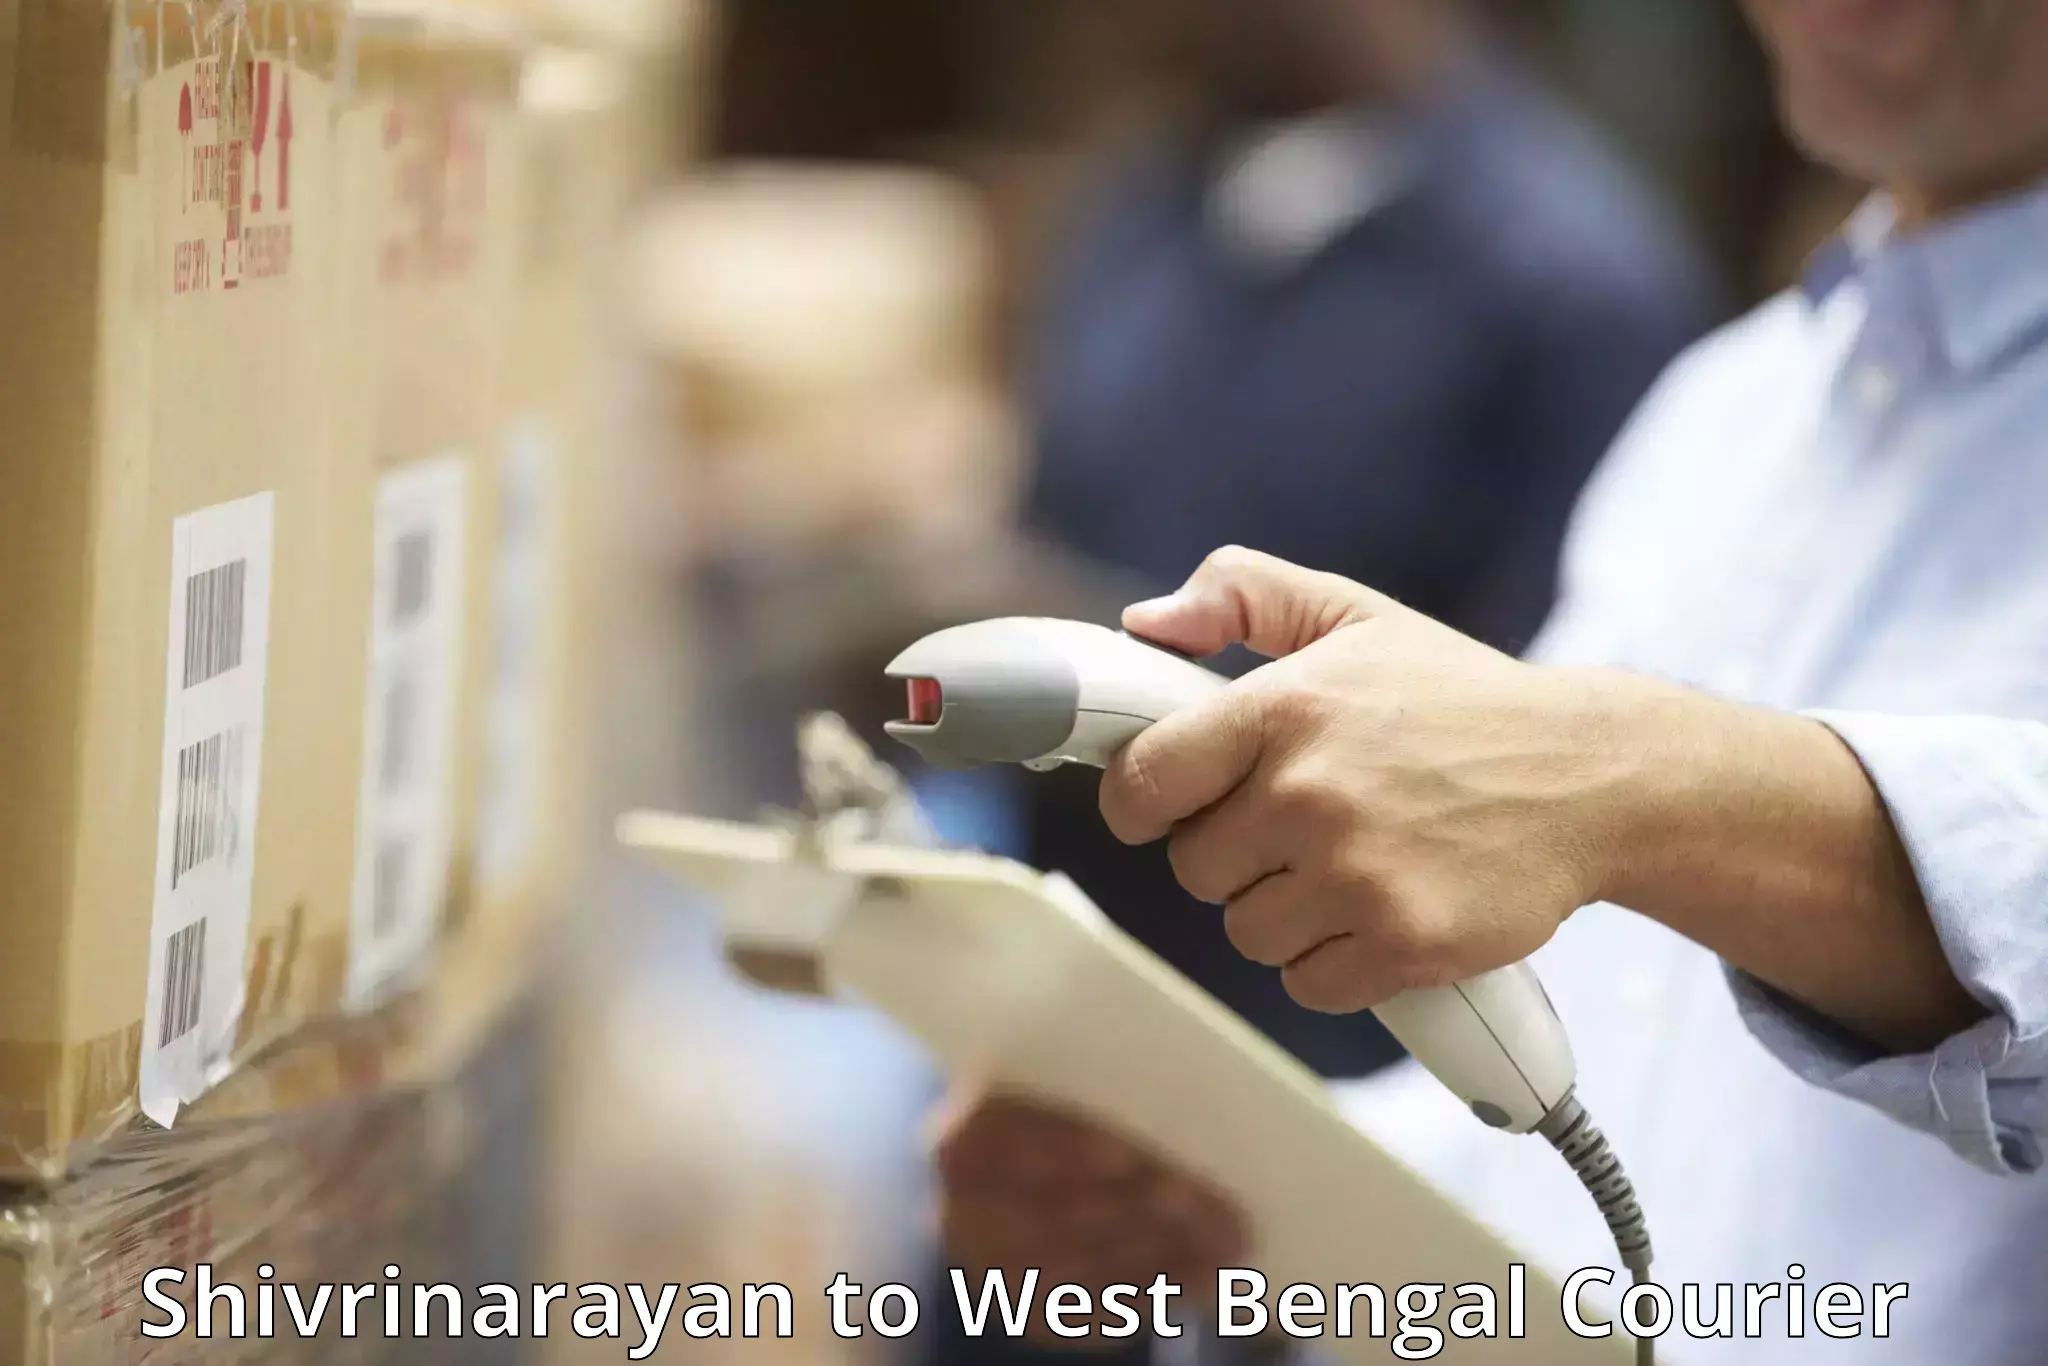 Luggage transport consultancy Shivrinarayan to West Bengal